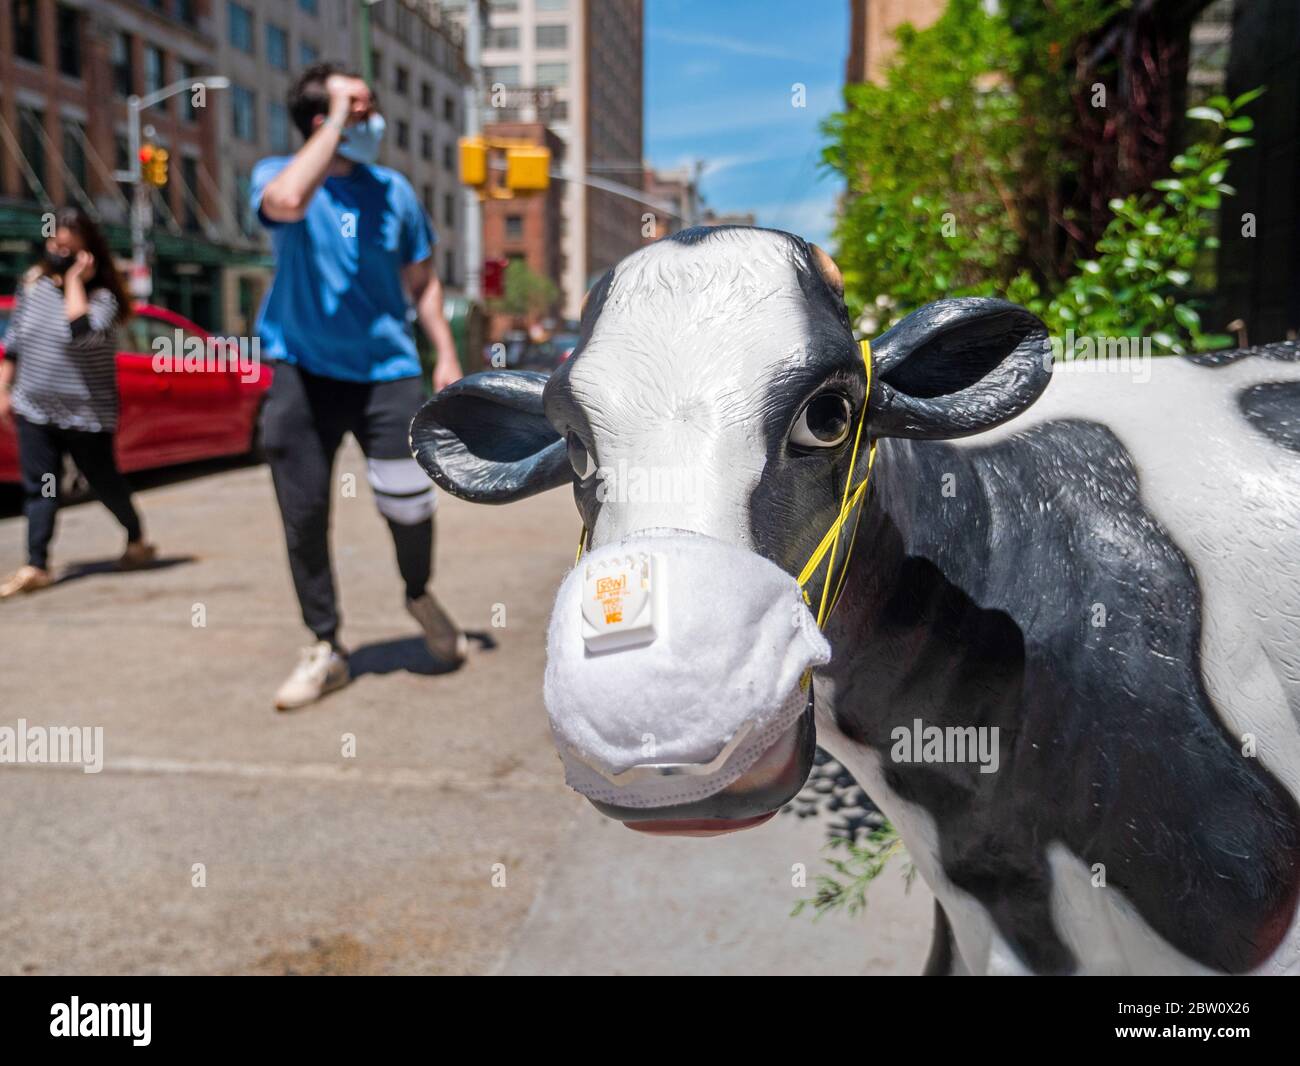 New York, New York, USA. 27th May, 2020. The cow in front of well known Tribeca NYC landmark Bubbys restaurant is staying covid safe wearing a mask in front of the entrance. The restaurant known for its brunch recently opened for take out only during the NYC lockdown. Credit: Milo Hess/ZUMA Wire/Alamy Live News Stock Photo